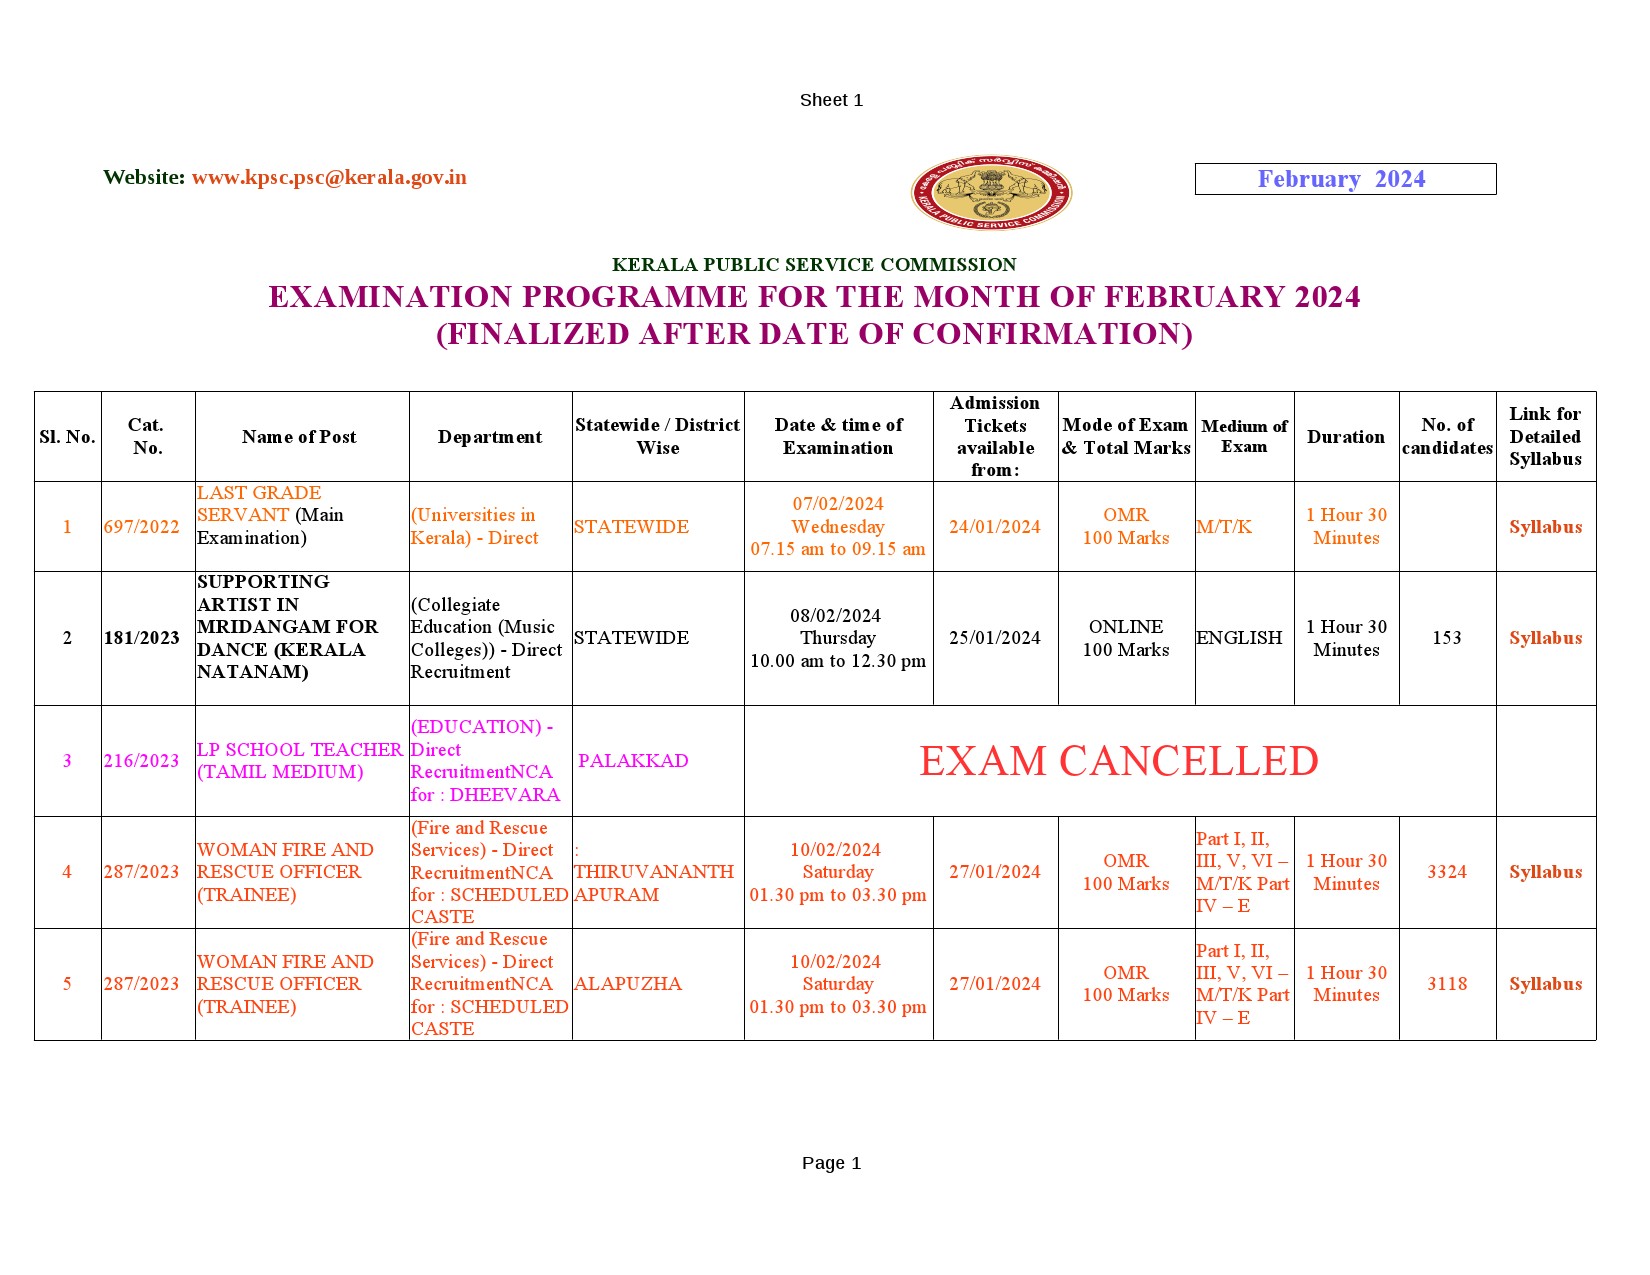 Examination Programme For The Month Of February 2024 - Notification Image 1